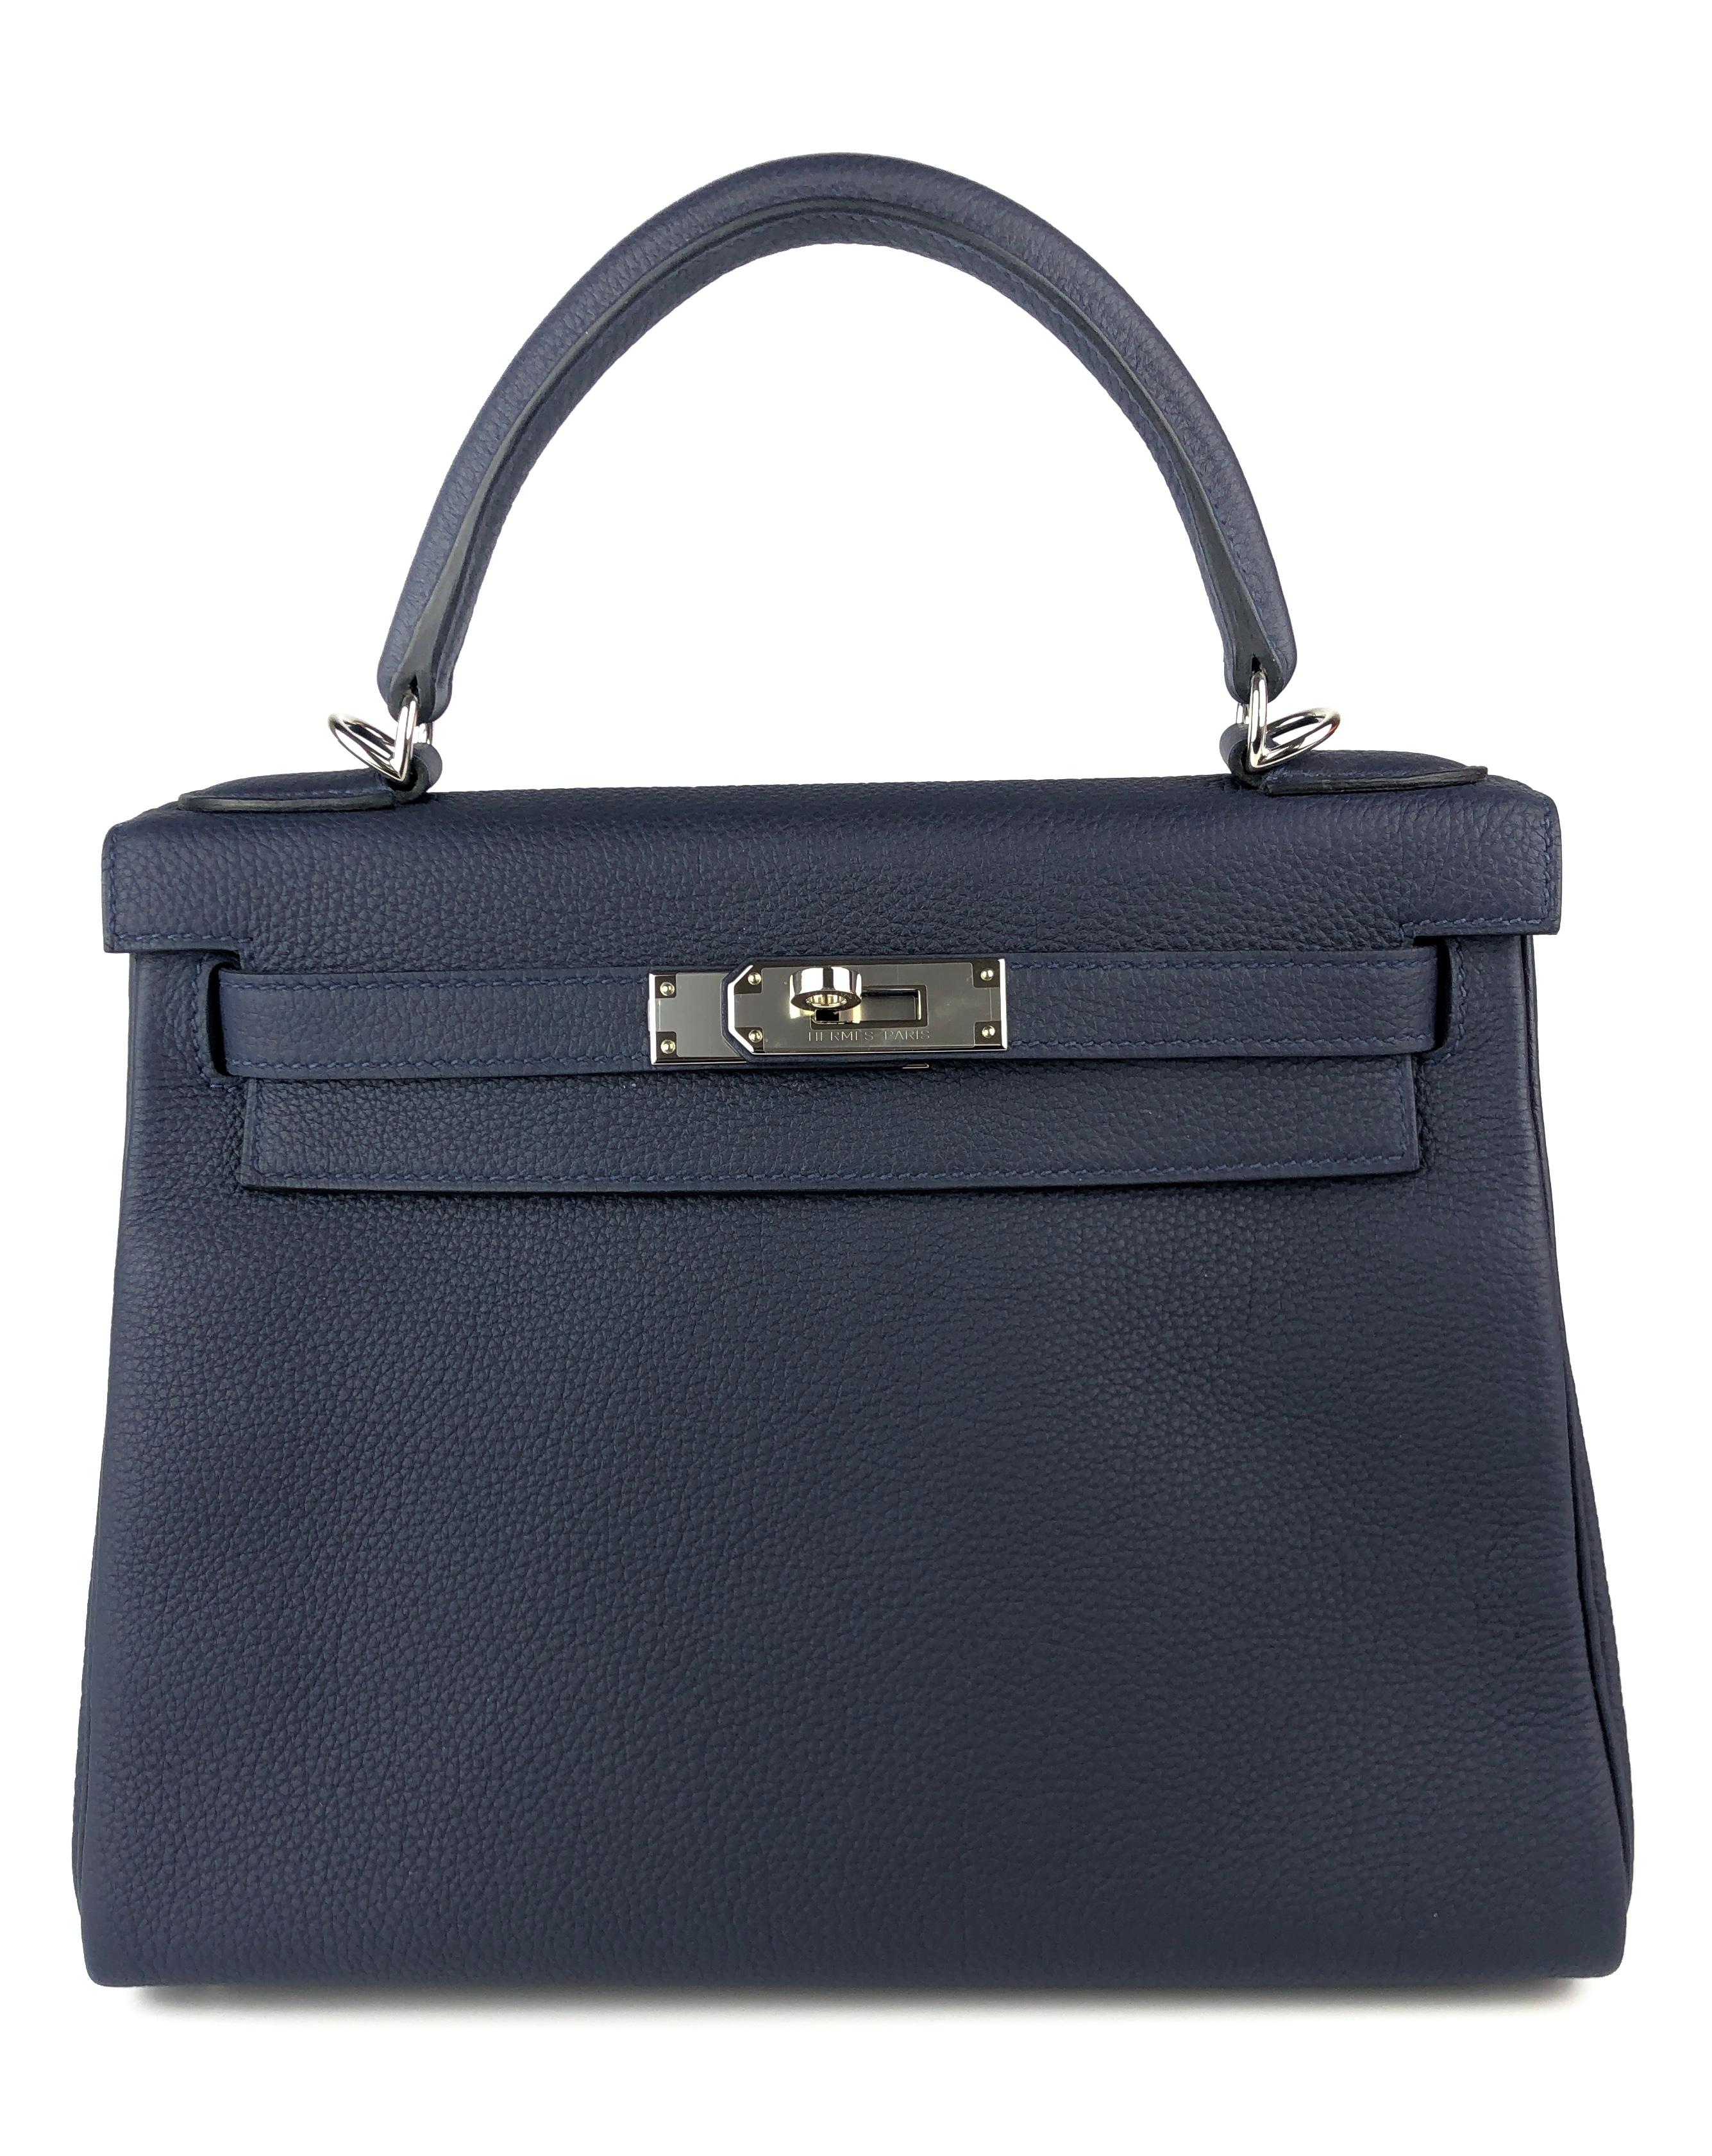 Rare Stunning Hermes Kelly 28 Bleu Nuit Togo Leather Complimented by Palladium Hardware. Excellent Condition with plastic on Hardware and feet! D Stamp 2019.

Please keep in mind that this is a pre owned item, the bag has been carried before, unless